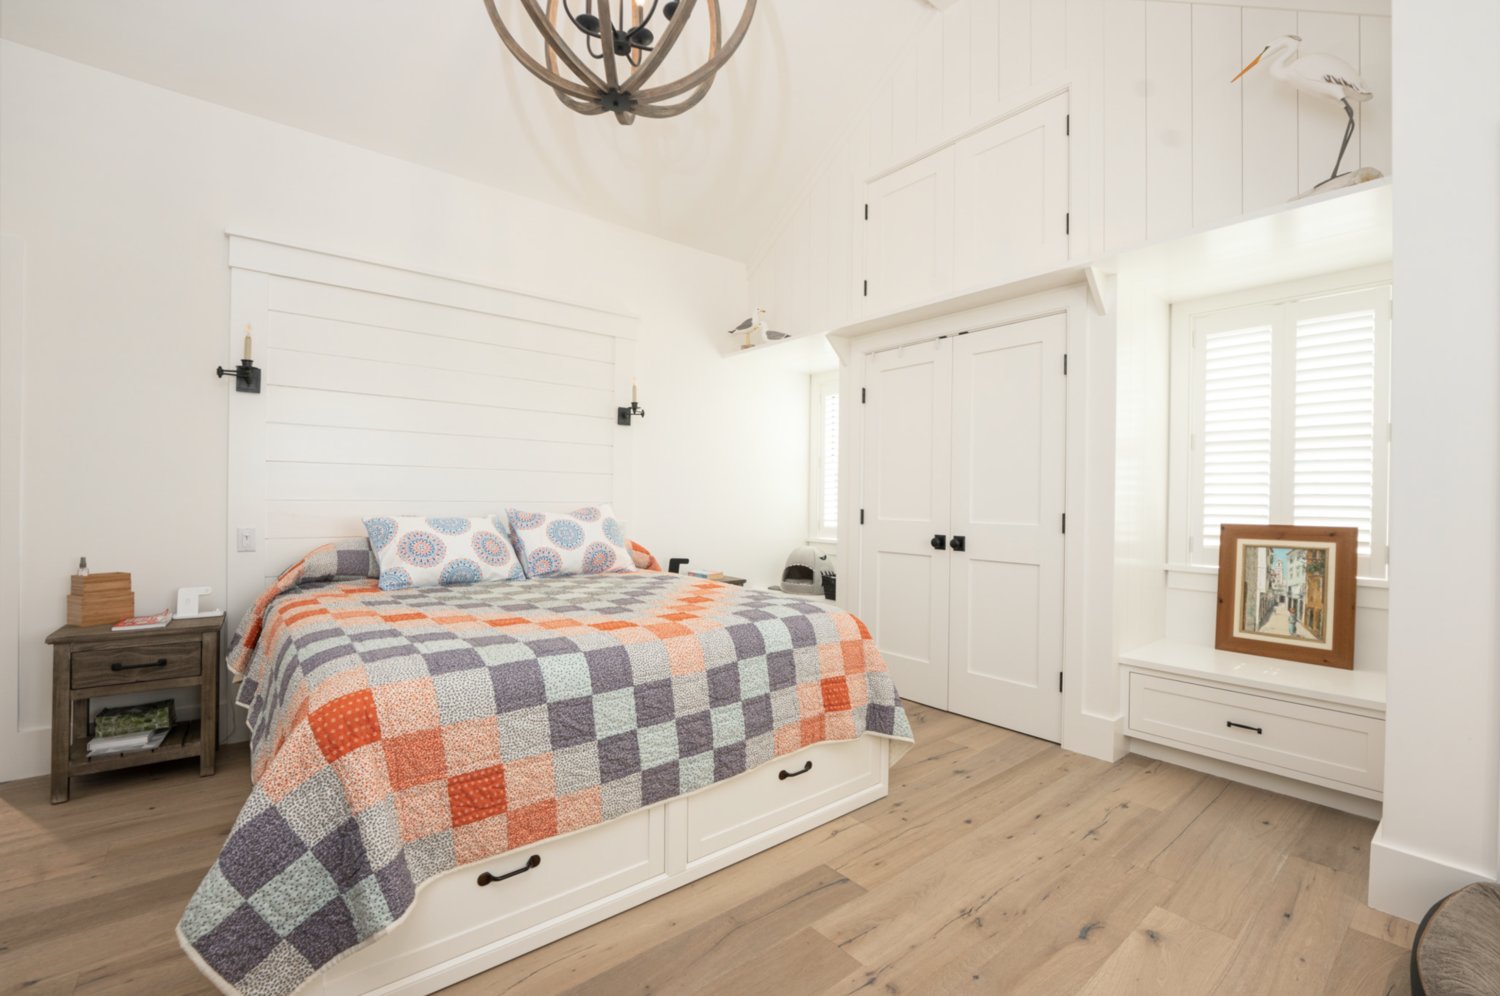 This bedroom has ample closet space and a vaulted ceiling.